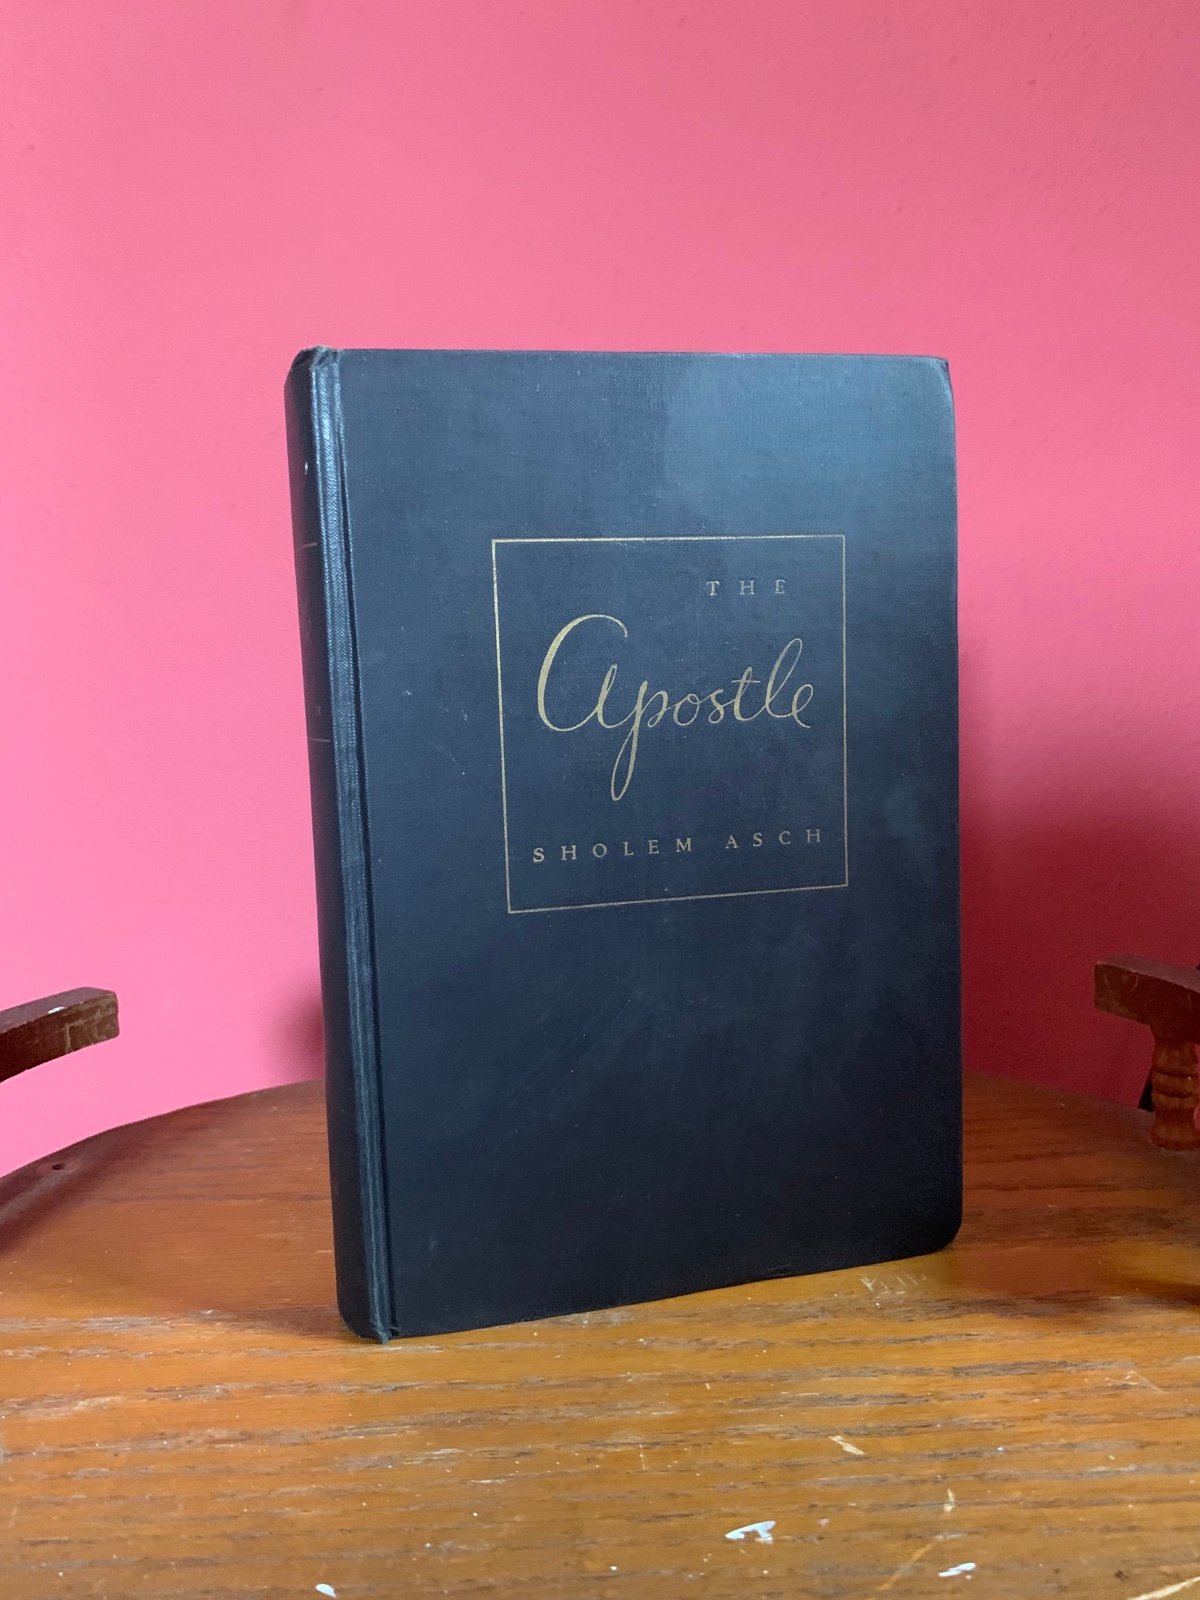 The Apostle by Sholem Asch 1943 First Edition dTlfcQEkf